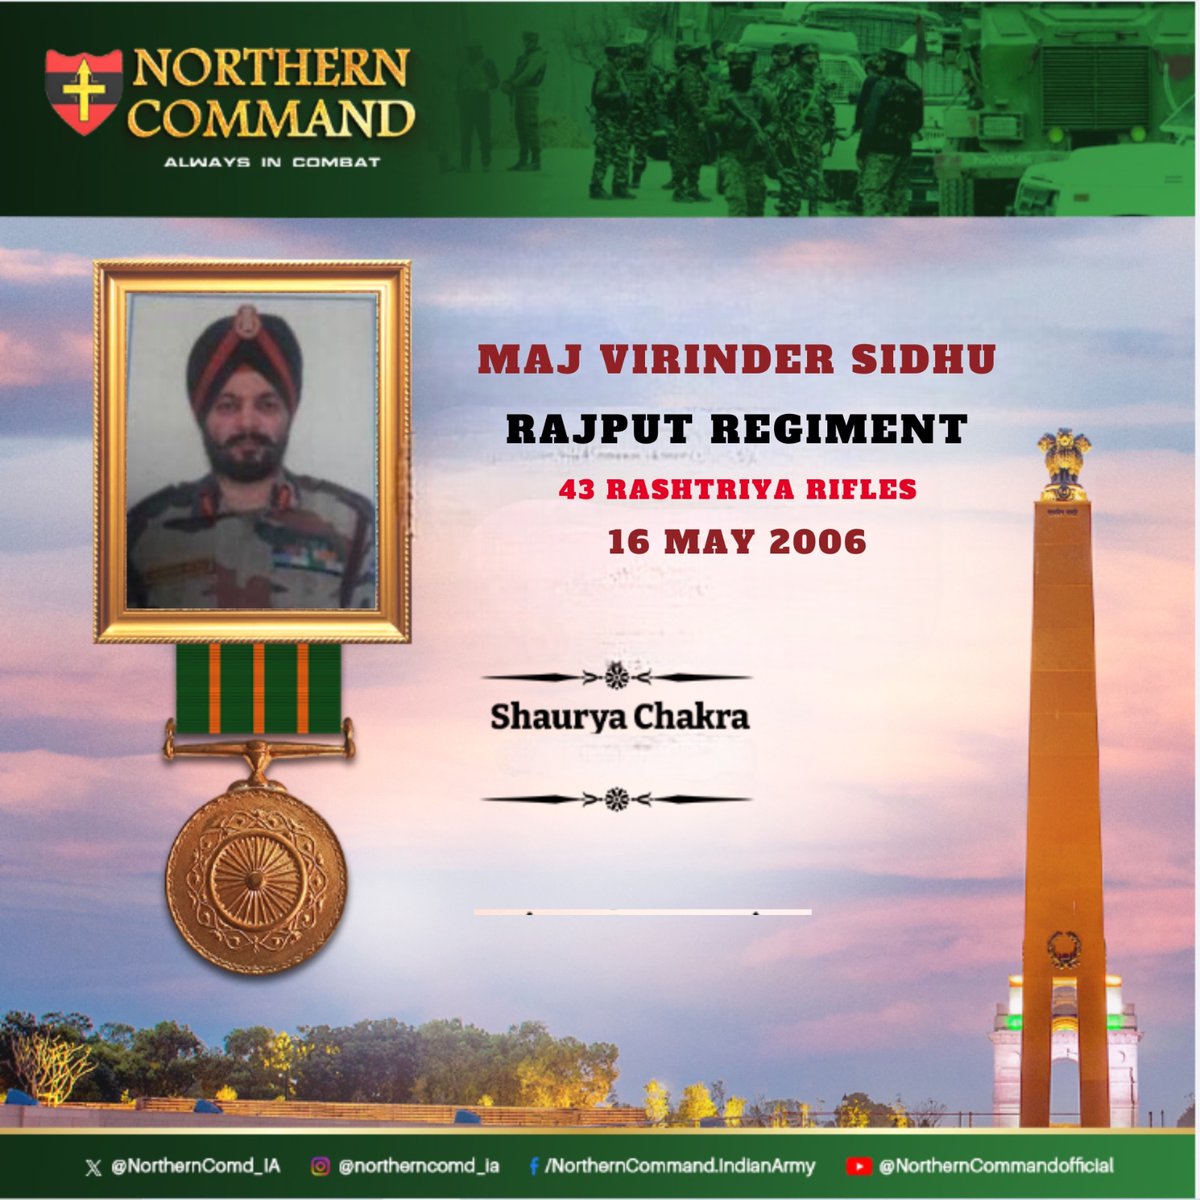 16 May 2006 #JammuAndKashmir Major(Later Col) Virinder Sidhu of 43 RASHTRIYA RIFLES received information regarding the presence of terrorists in Jammu & Kashmir. In a fierce encounter, he individually eliminated three terrorists and thereafter bravely led his team to eliminate